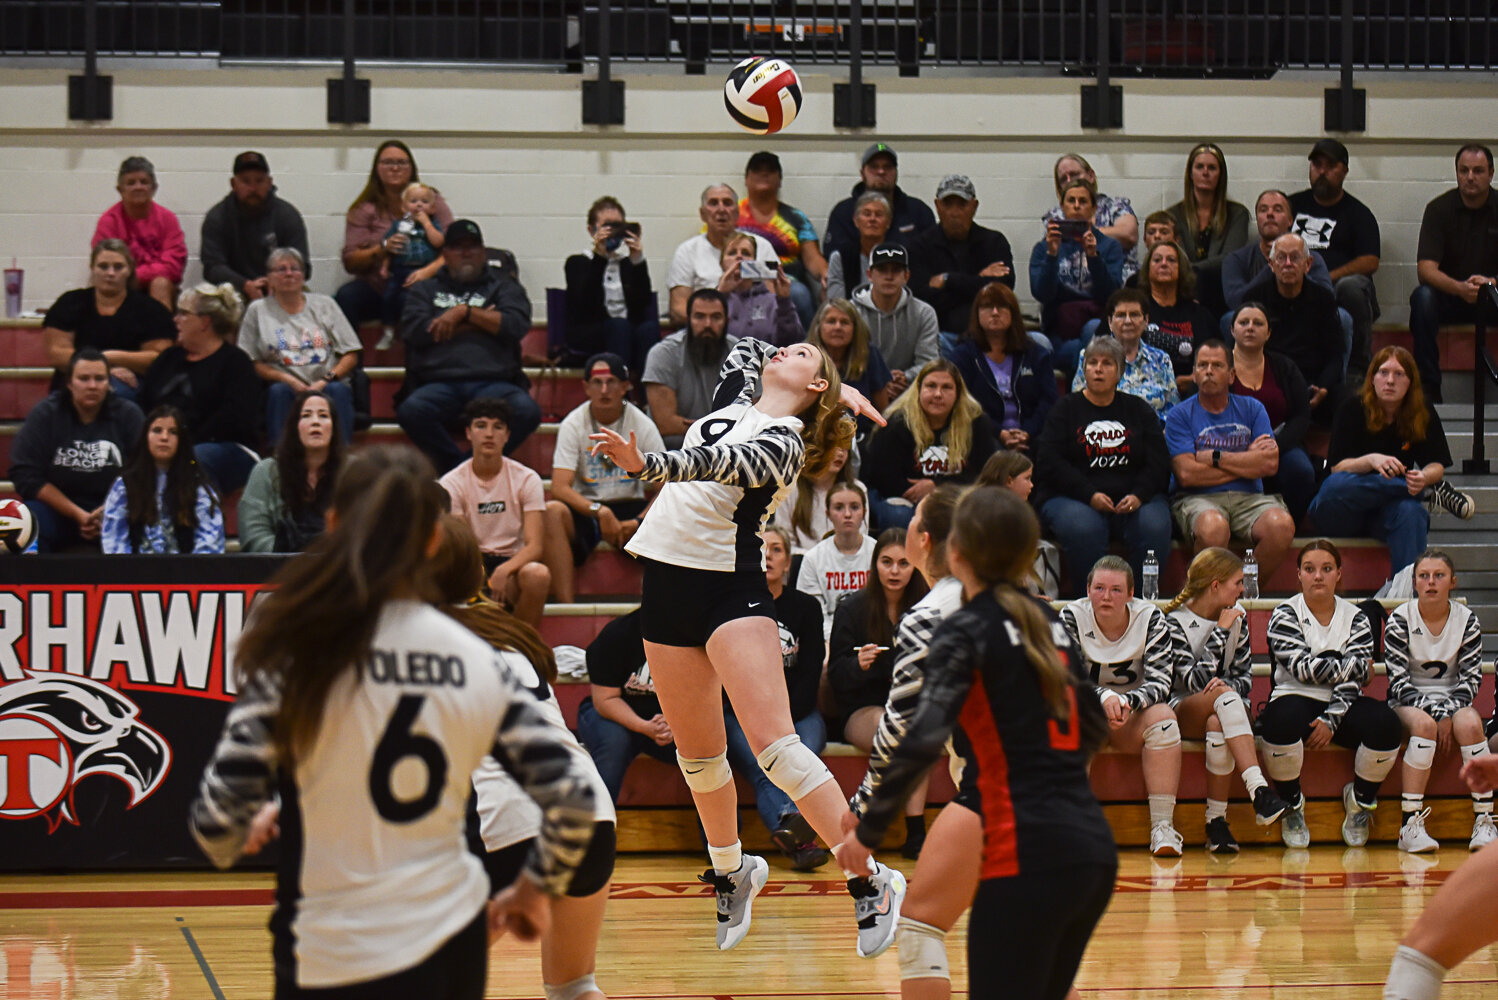 Alexis Young rises up to send the ball over the net during Toledo's match against Rainier on Sept. 19.